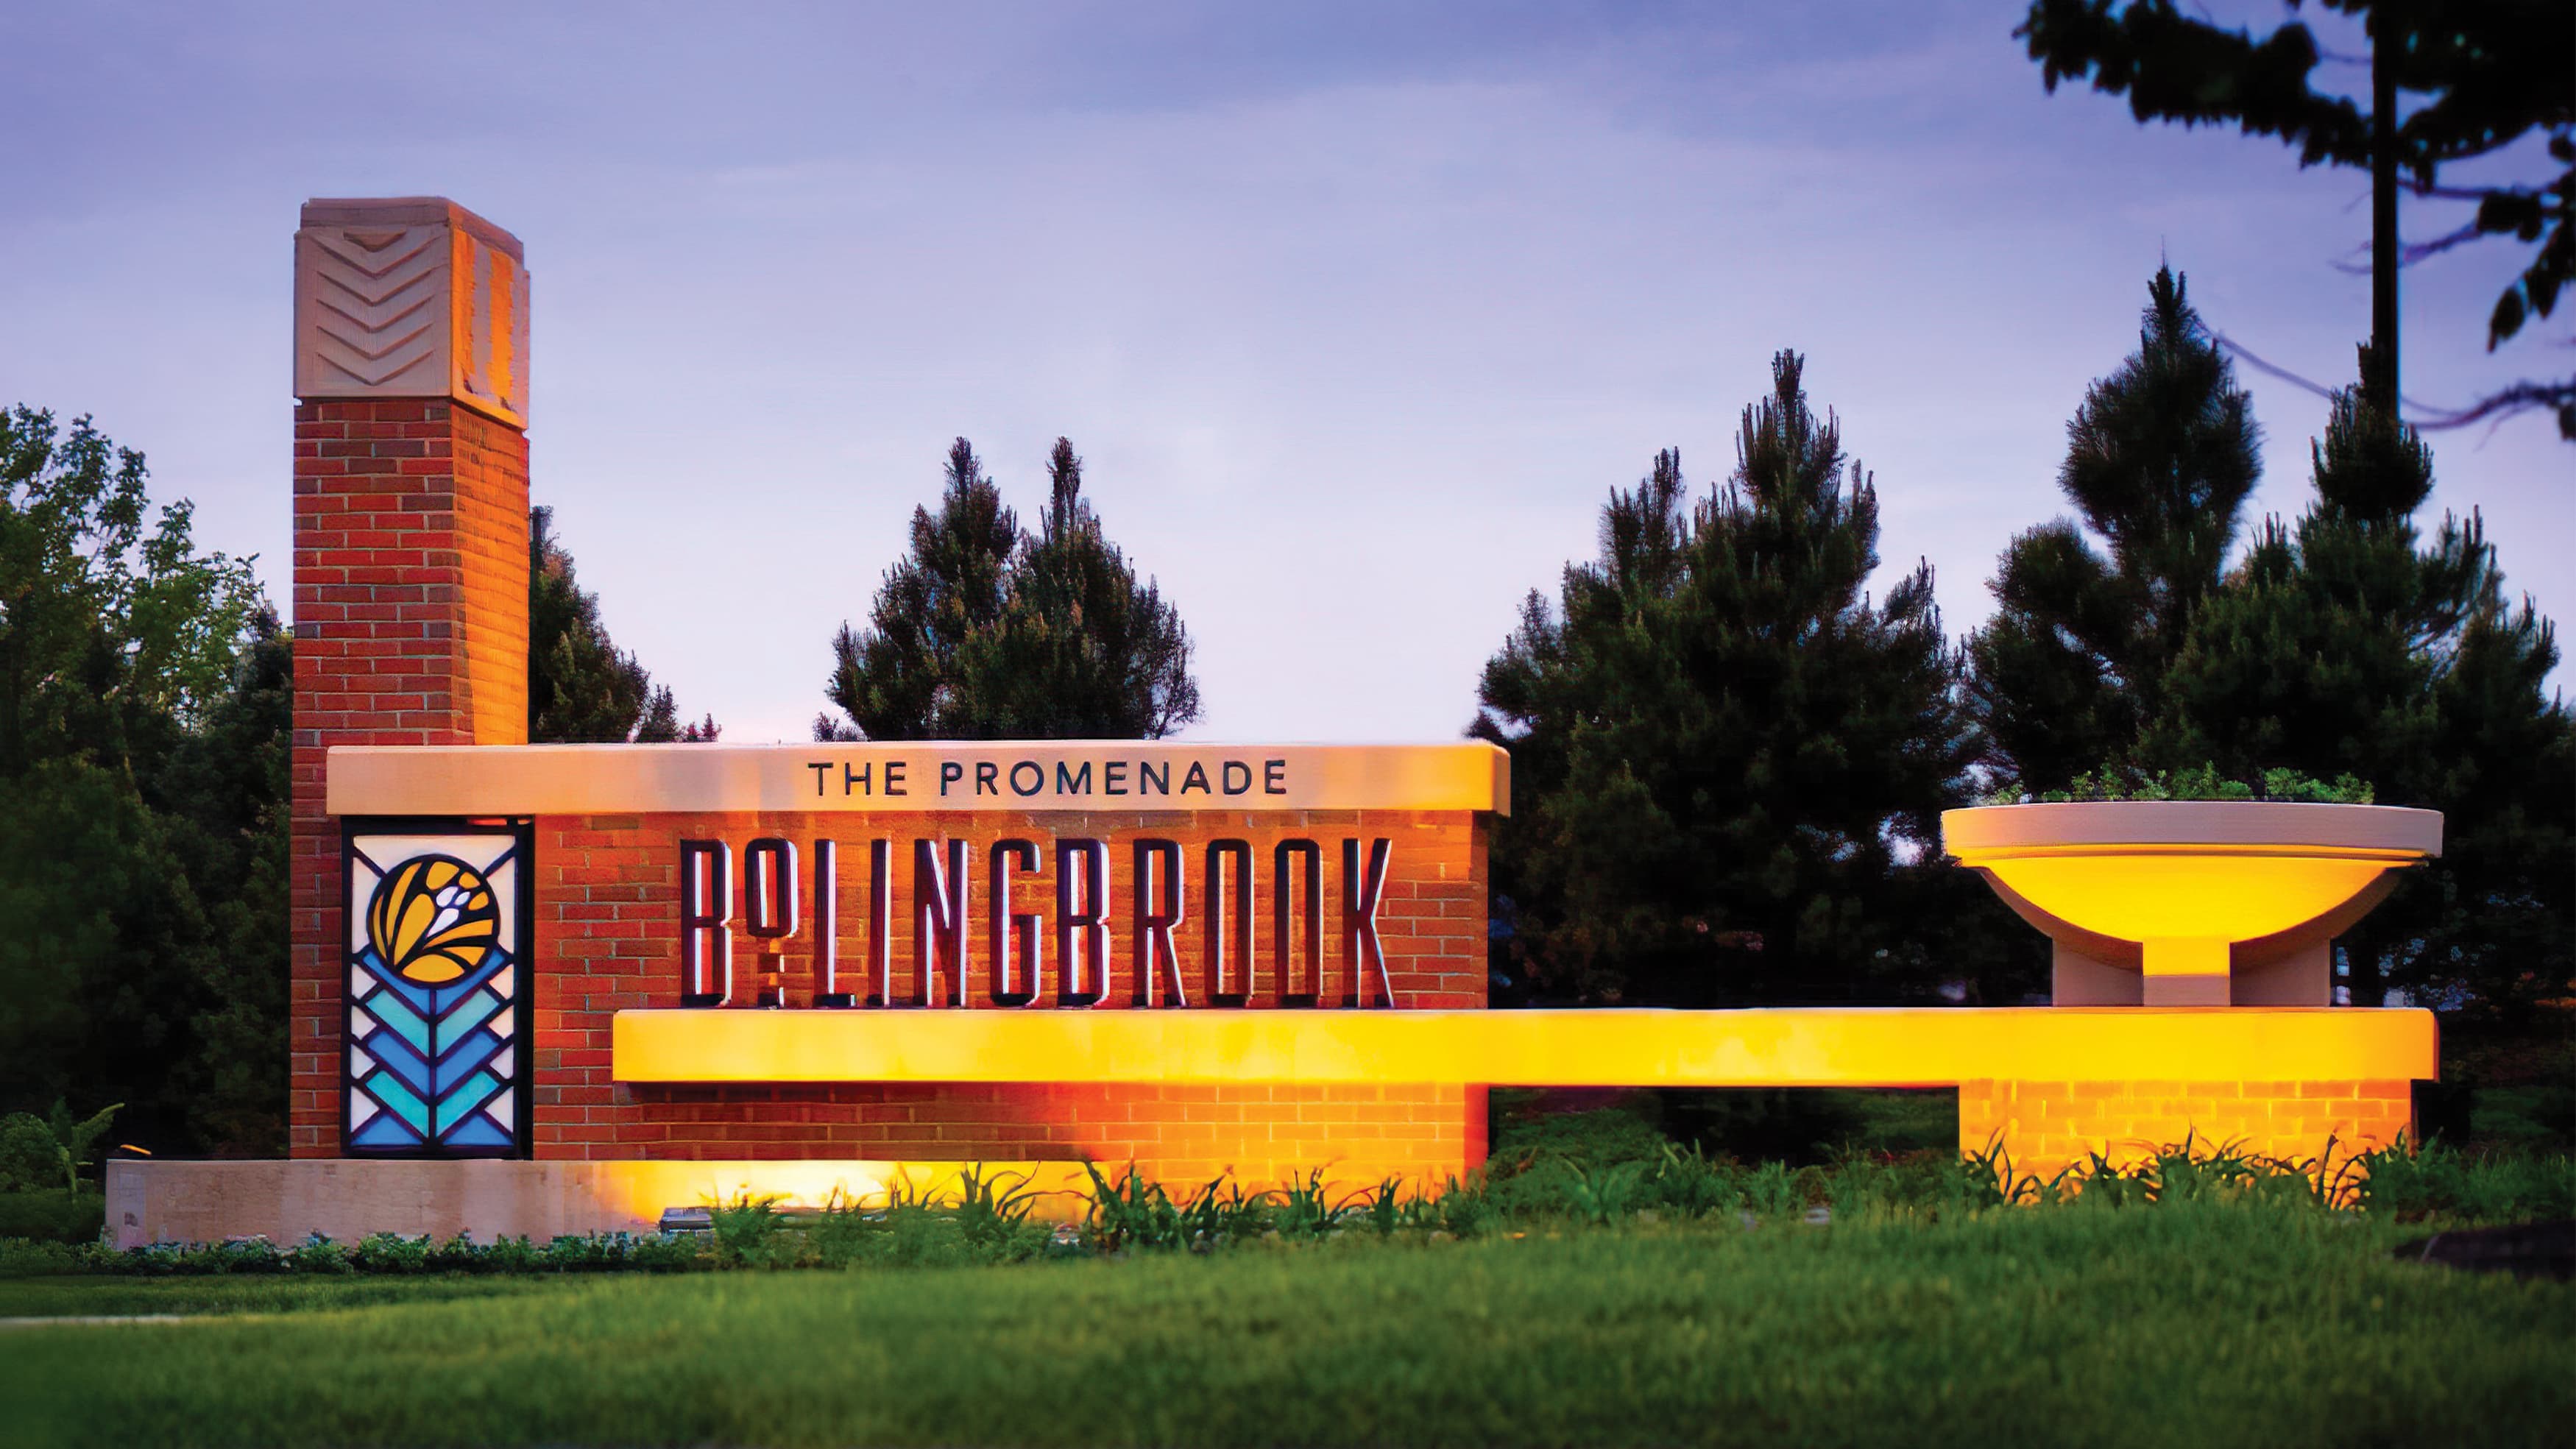 Architectural brick wall featuring Bolingbrook identity at dusk